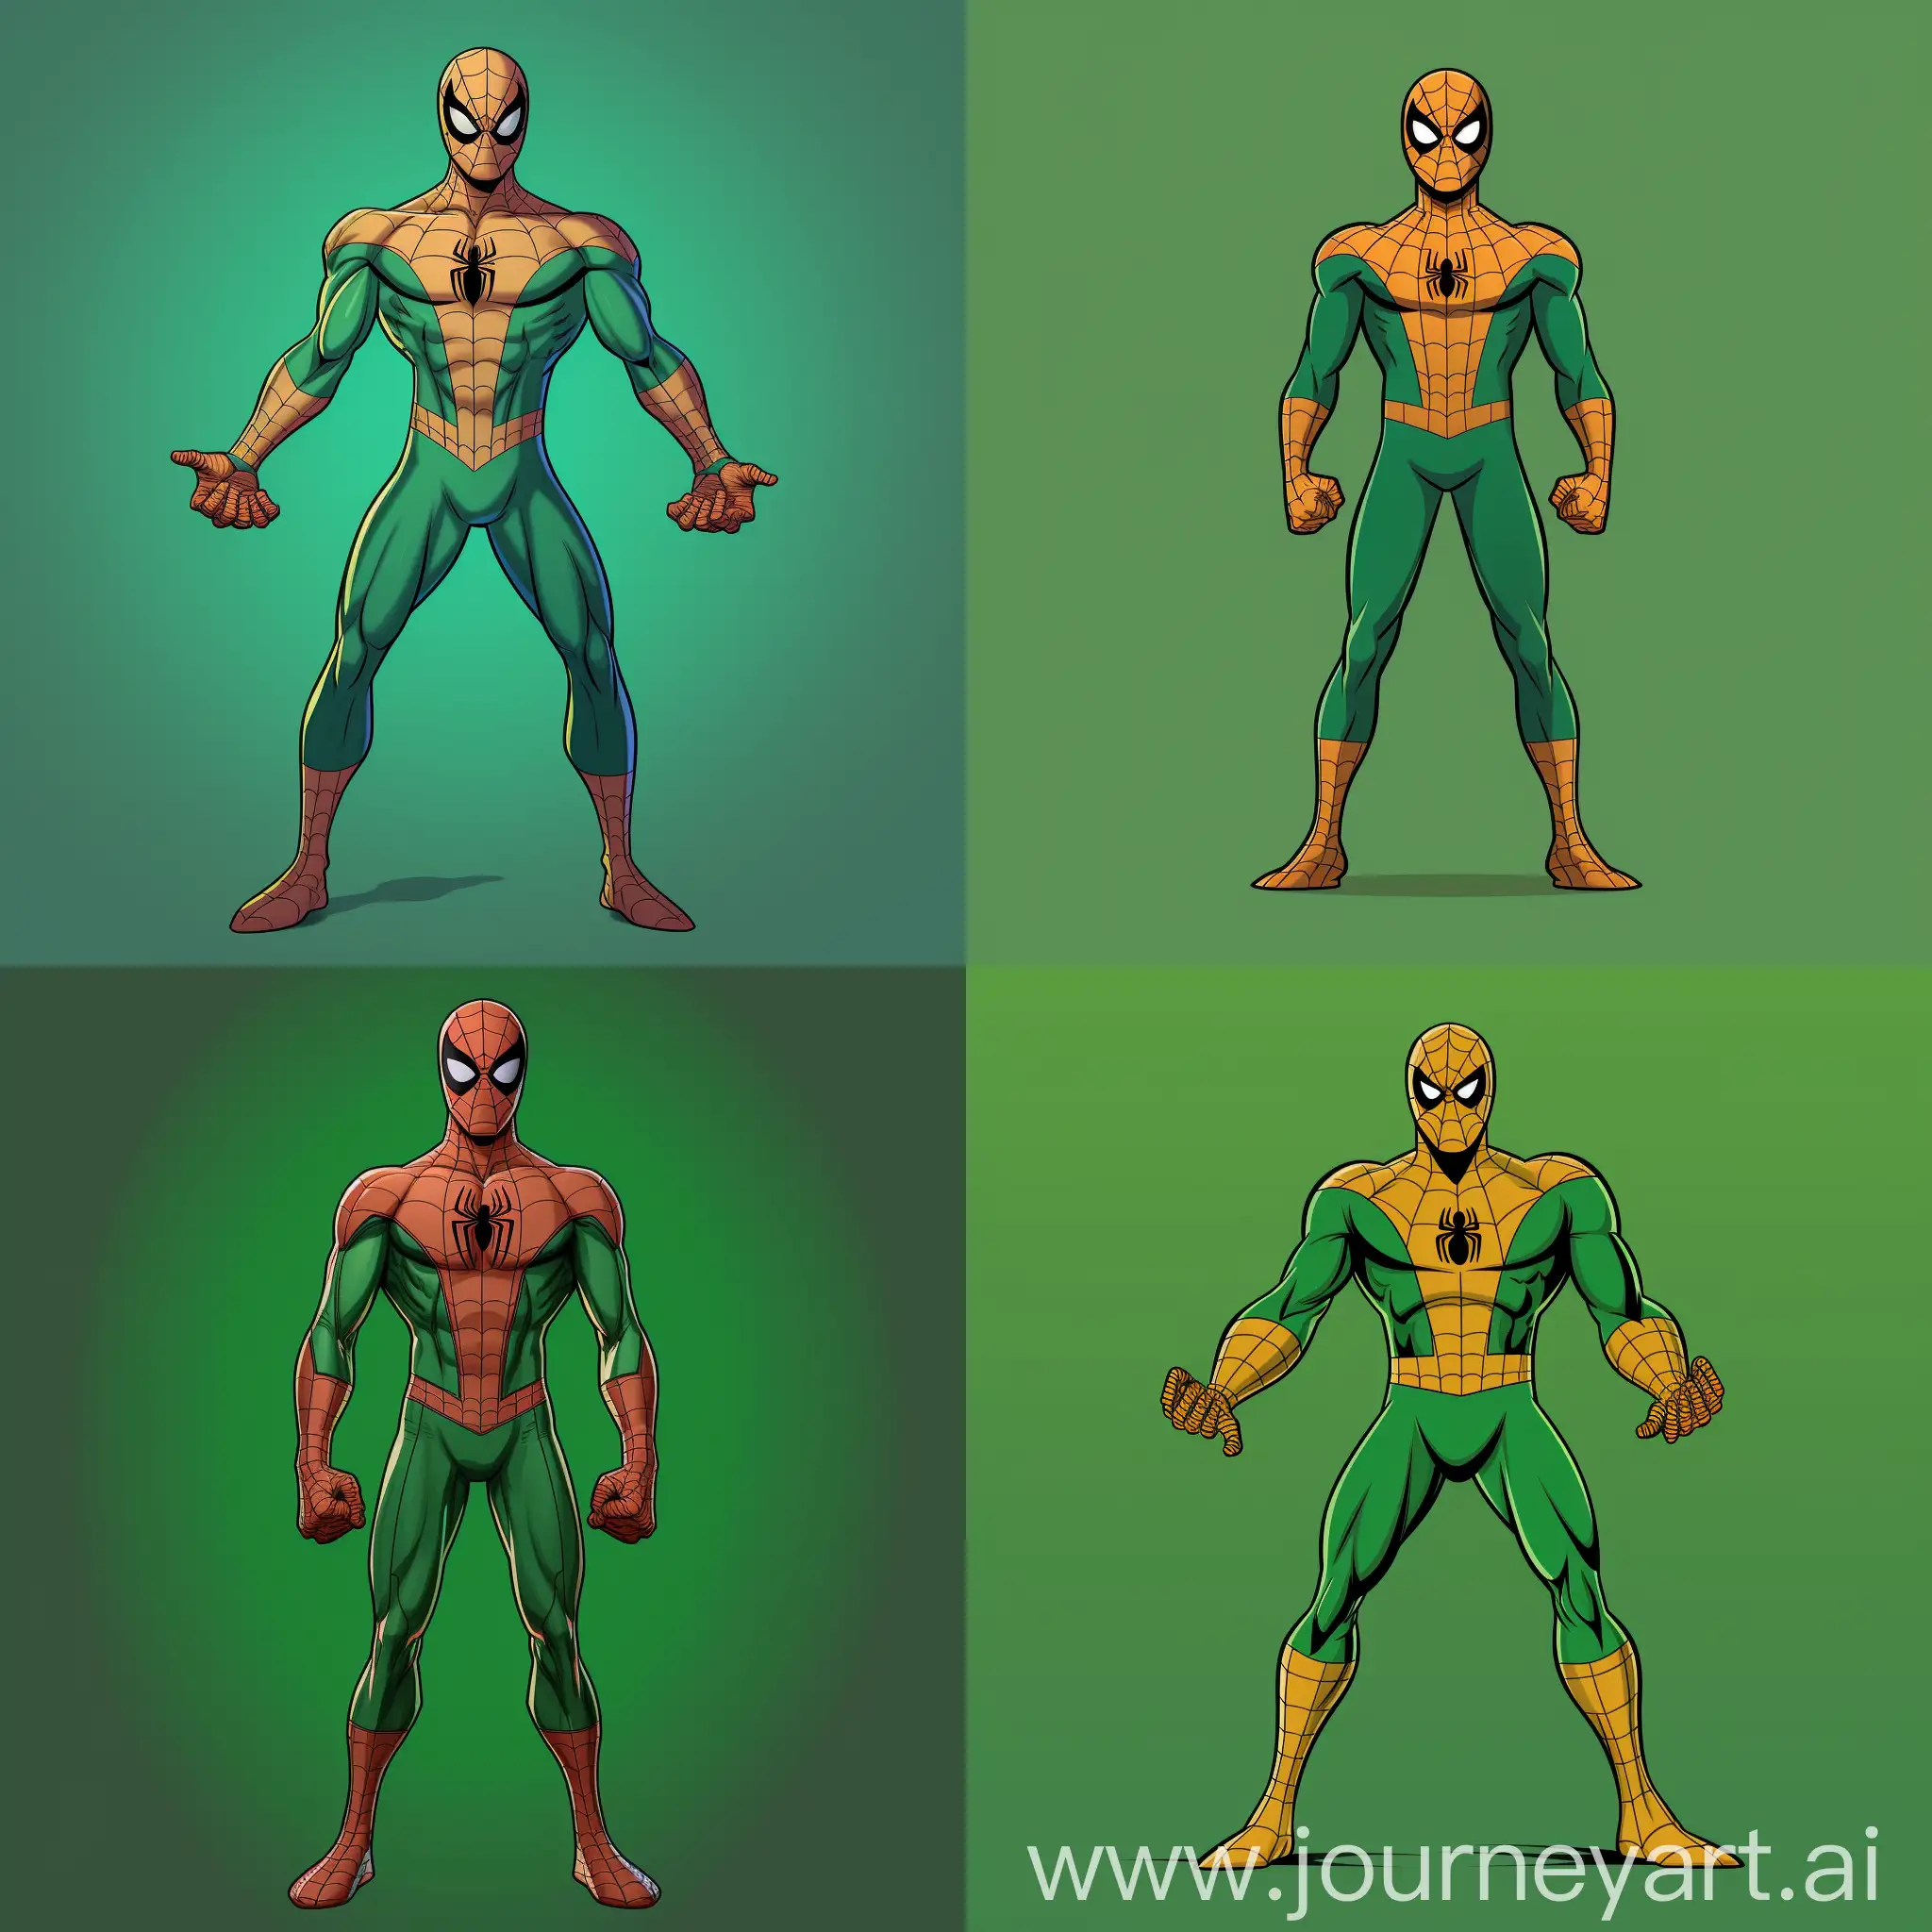 SpiderMan-as-ScoobyDoo-Character